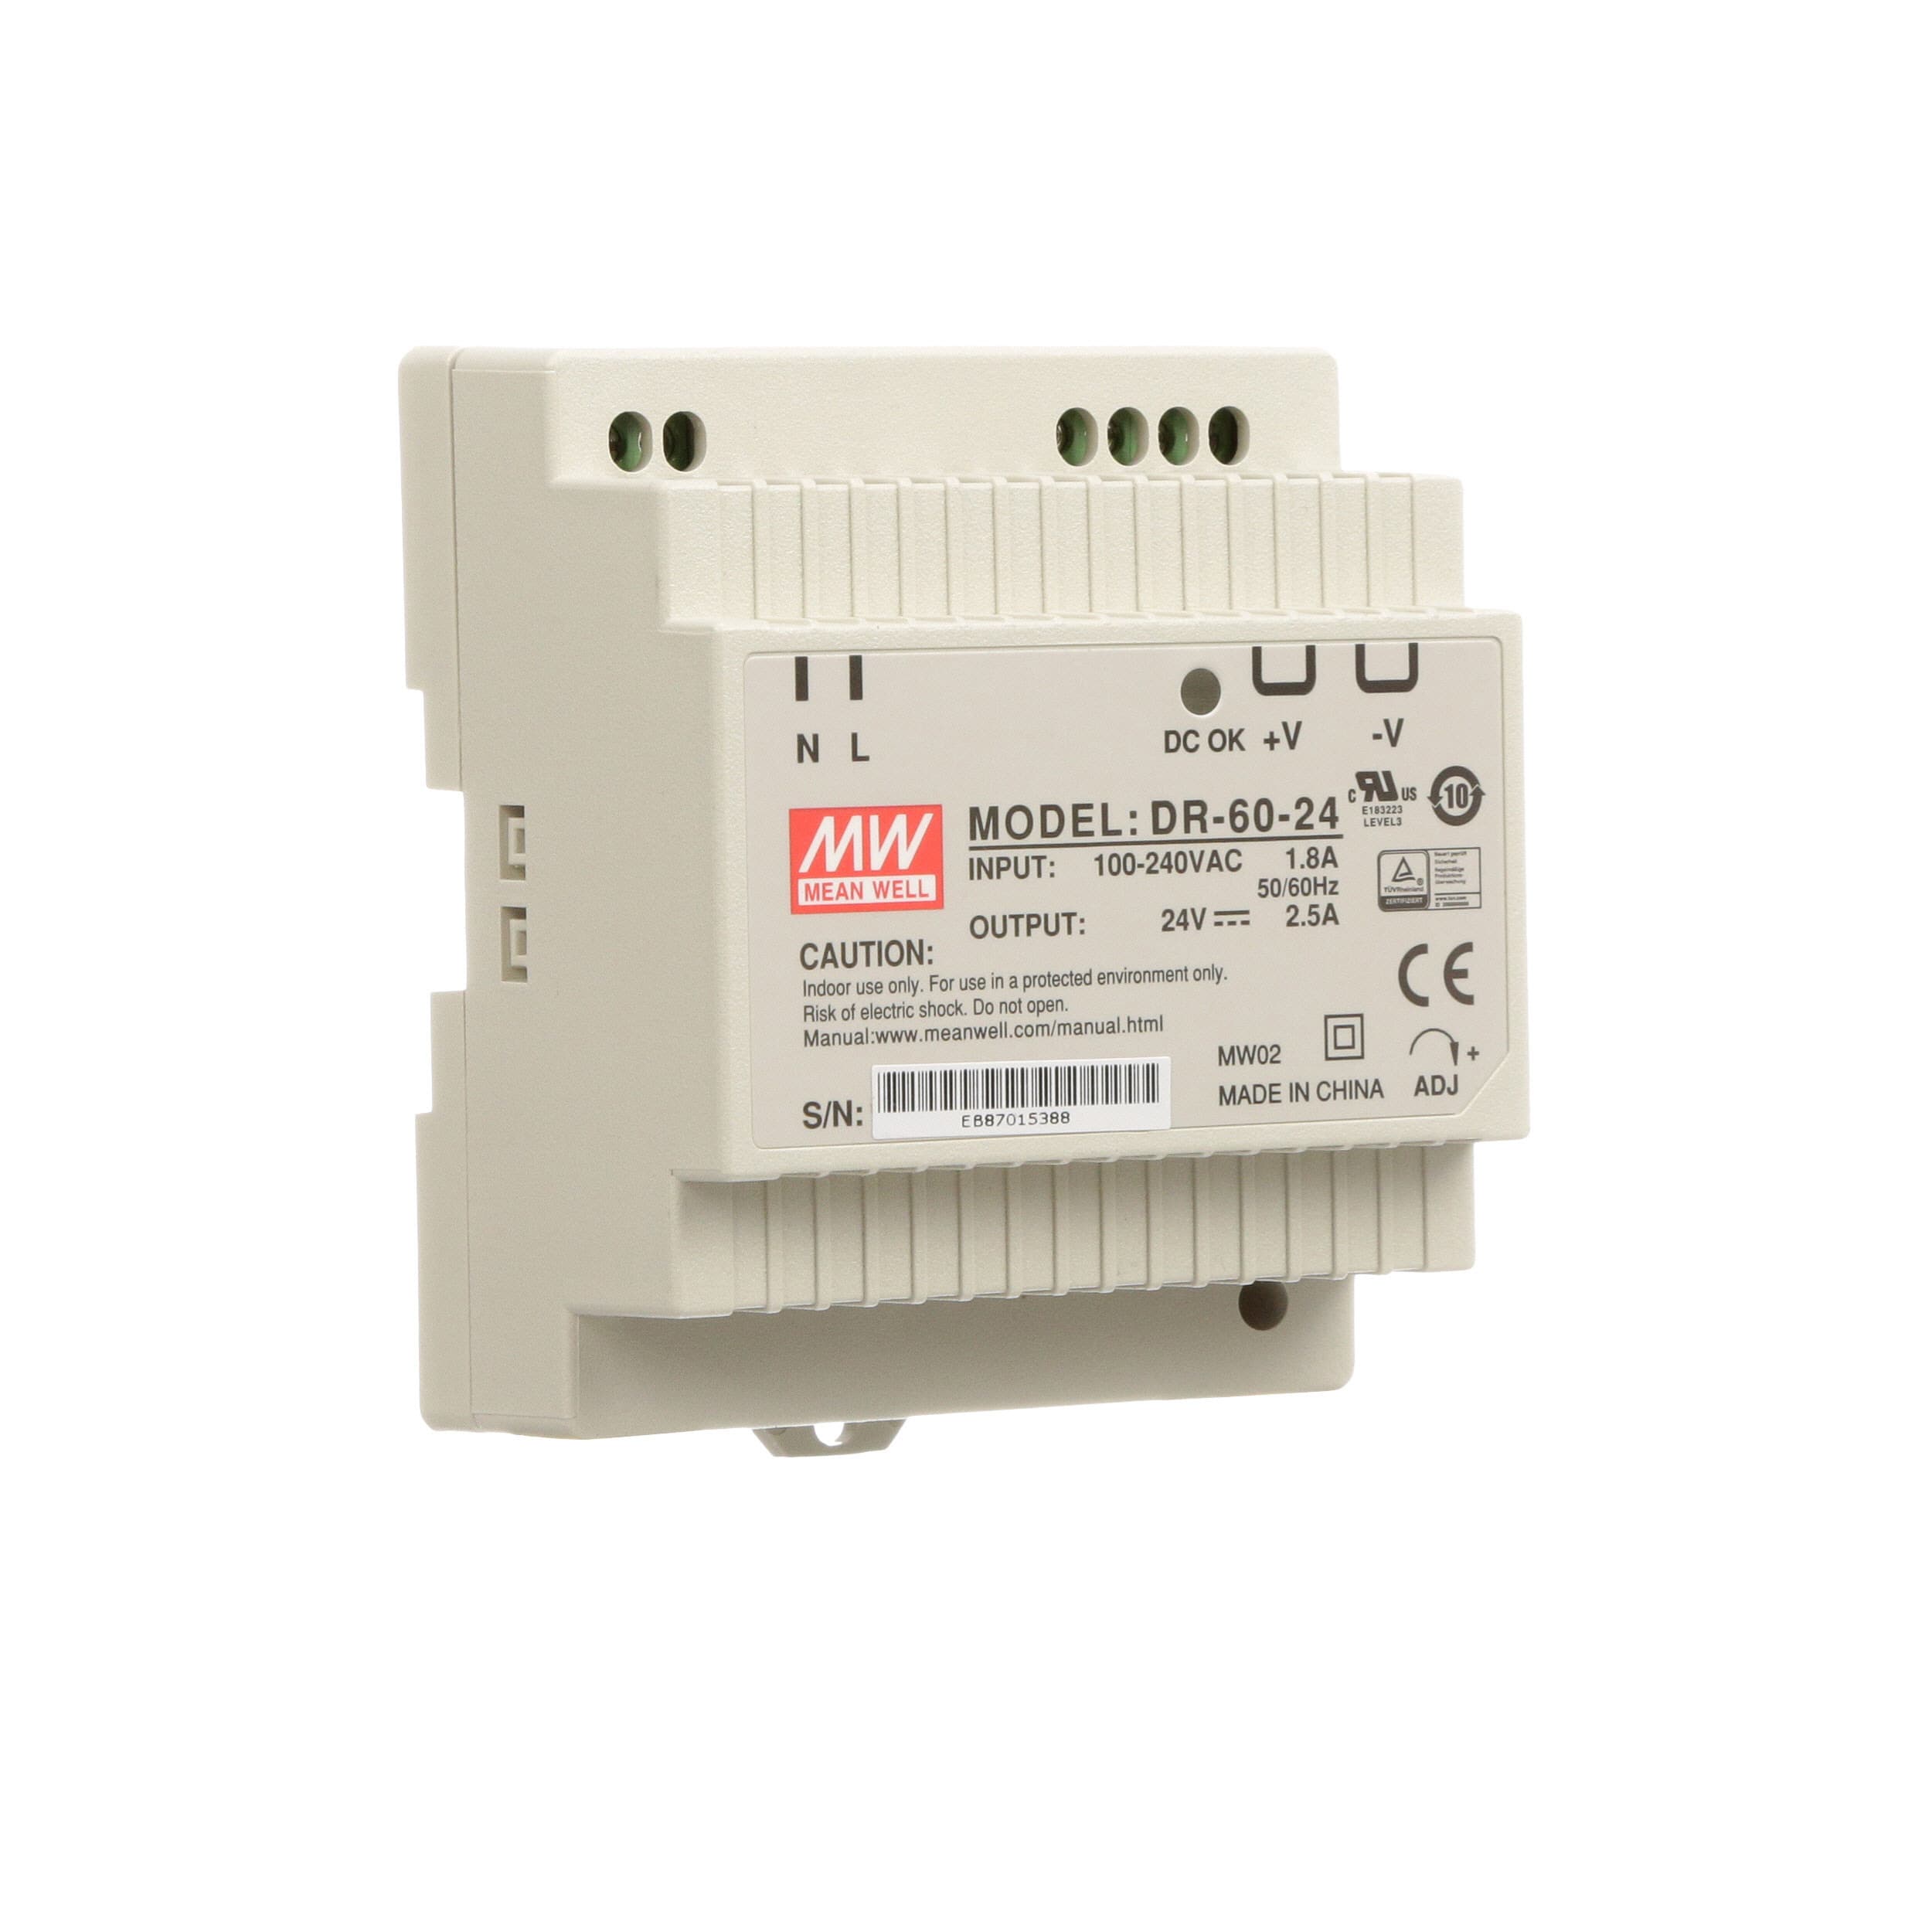 MEAN WELL - DR-60-24 - Power Supply,AC-DC,24V,2.5A,88-264VIn,Enclosed,DIN  Rail,Industrial,60W,DR Series - Allied Electronics & Automation, part of RS  Group